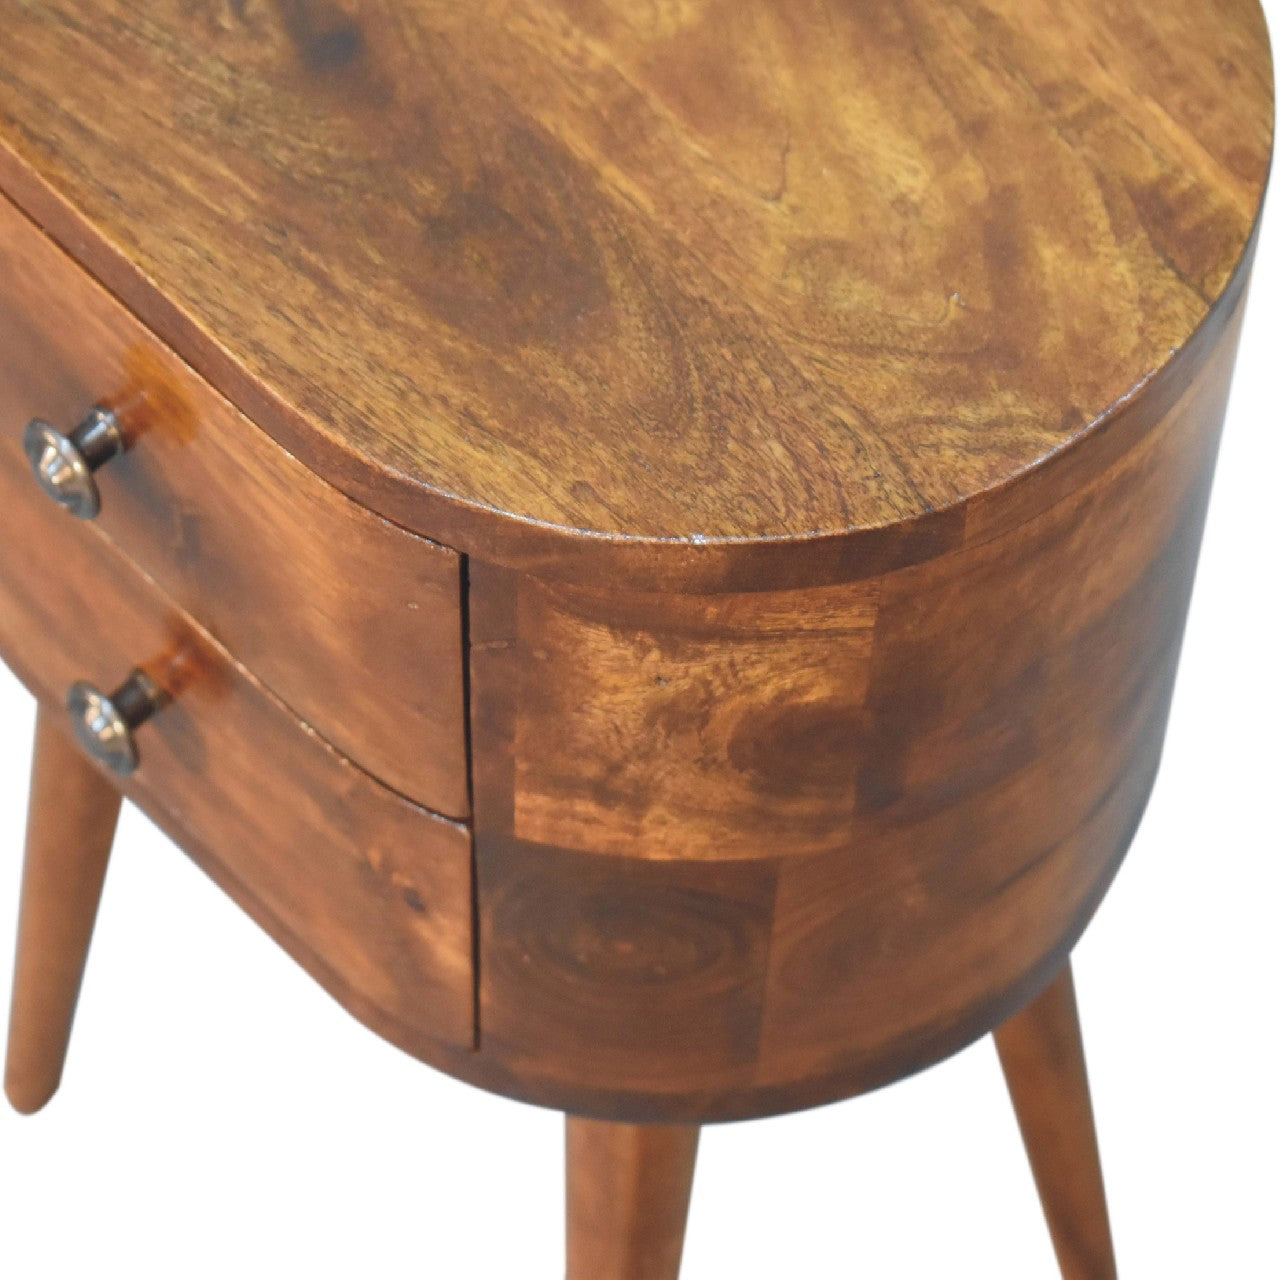 Mini Chestnut Rounded Bedside Table 2 Drawer Chest - CasaFenix